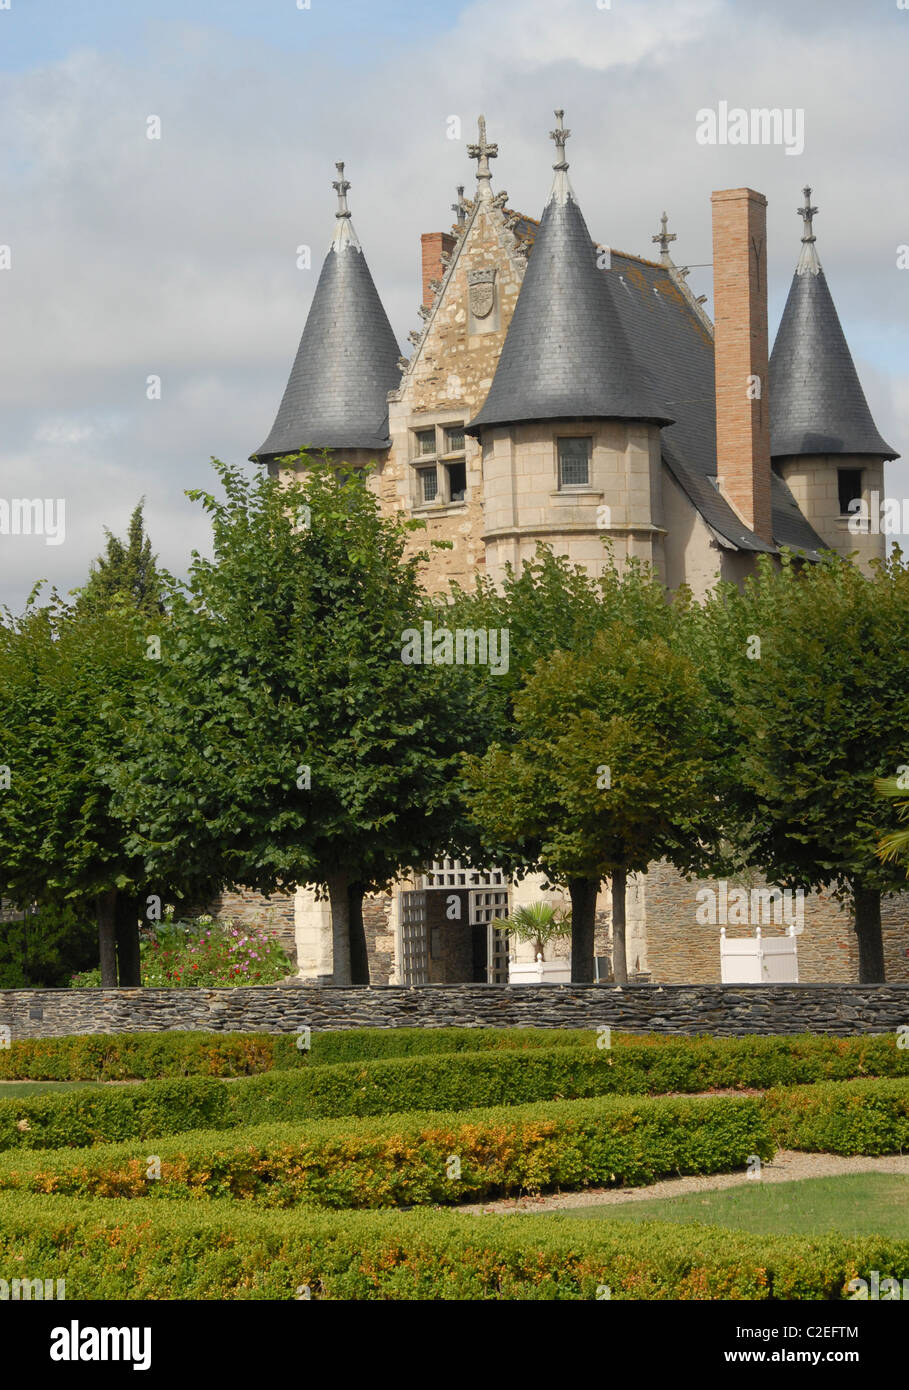 France, Pays de la Loire: Chatelet of Château d'Angers, a fortified castle in Angers in the UNESCo world heritage Loire Valley Stock Photo